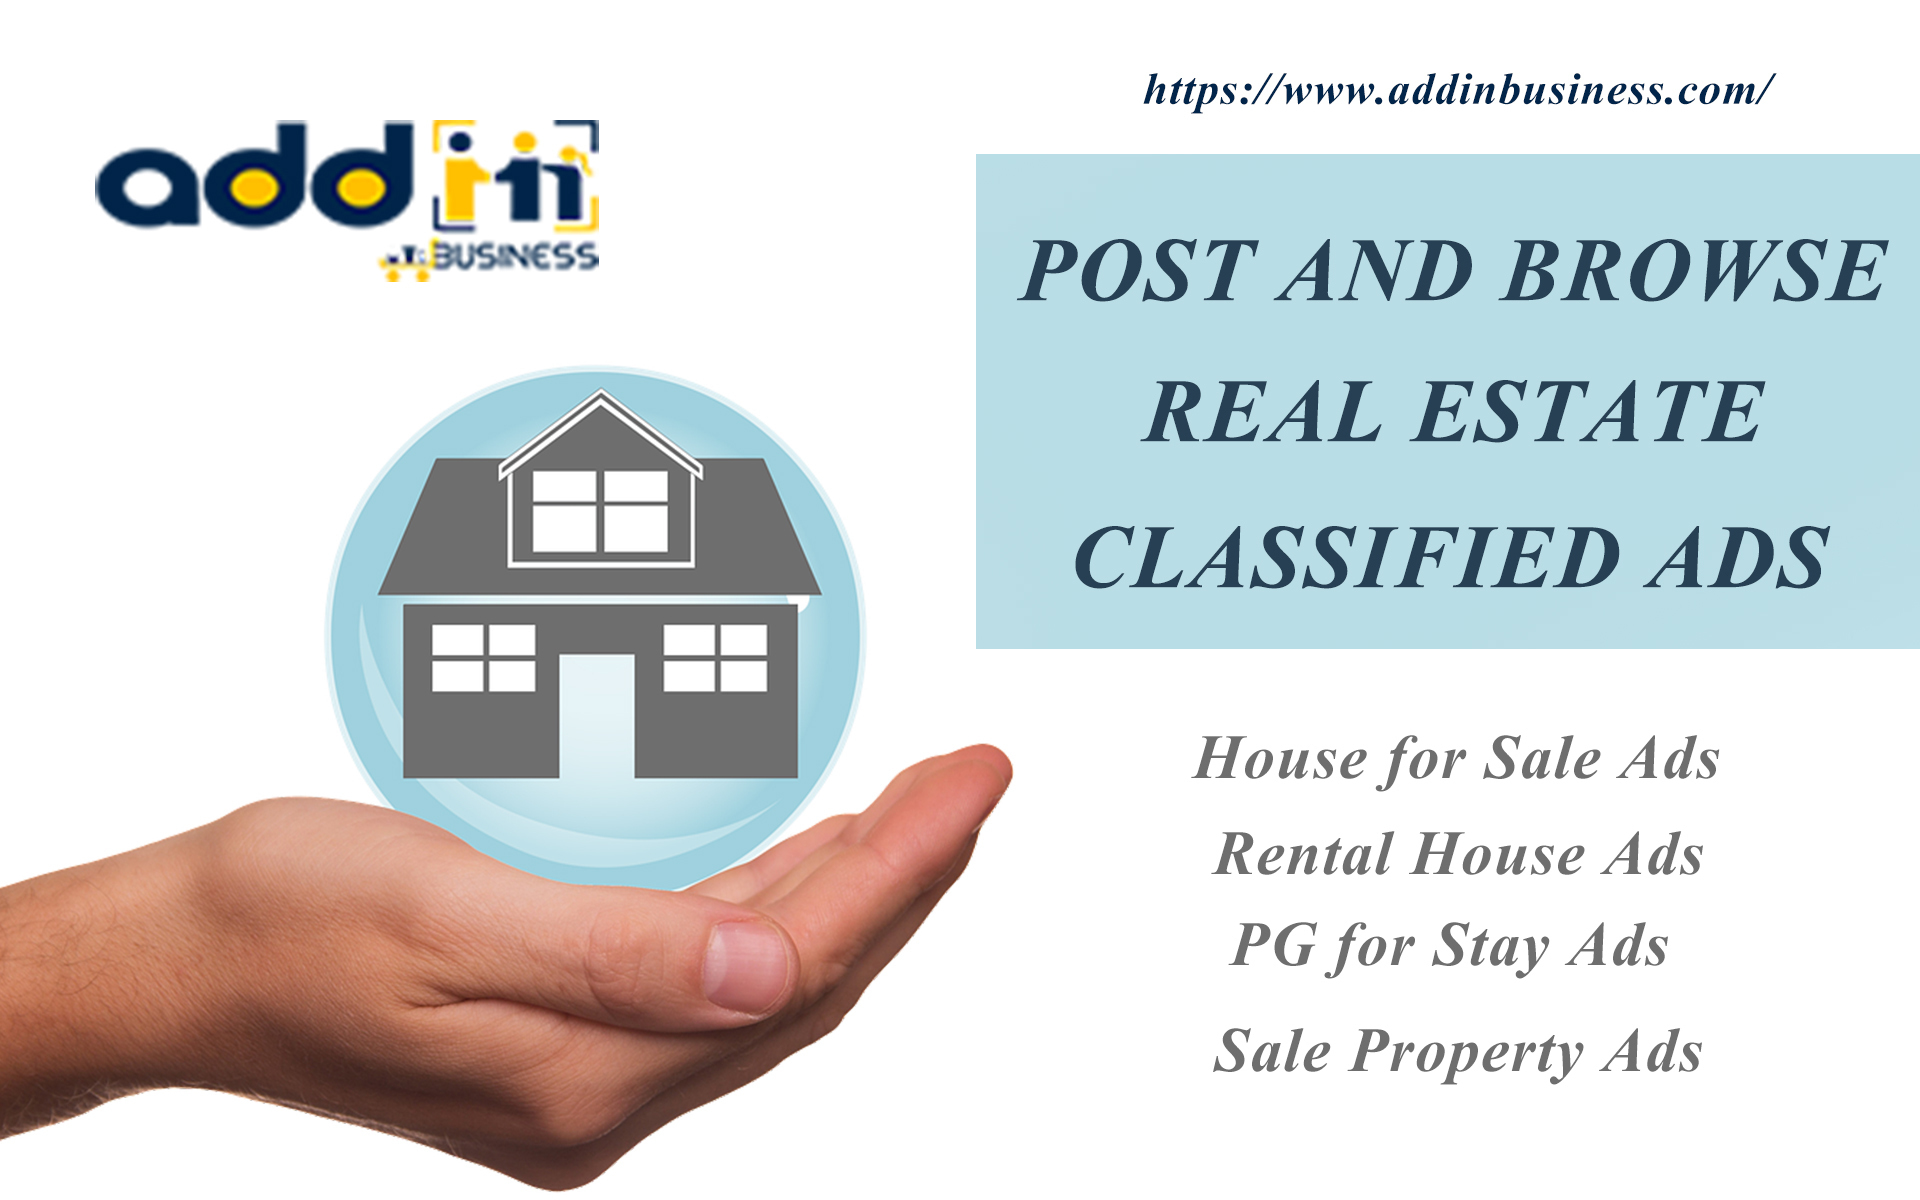 Post ads. Classified ads. Real Estate classifieds. Real Estate advertisement.